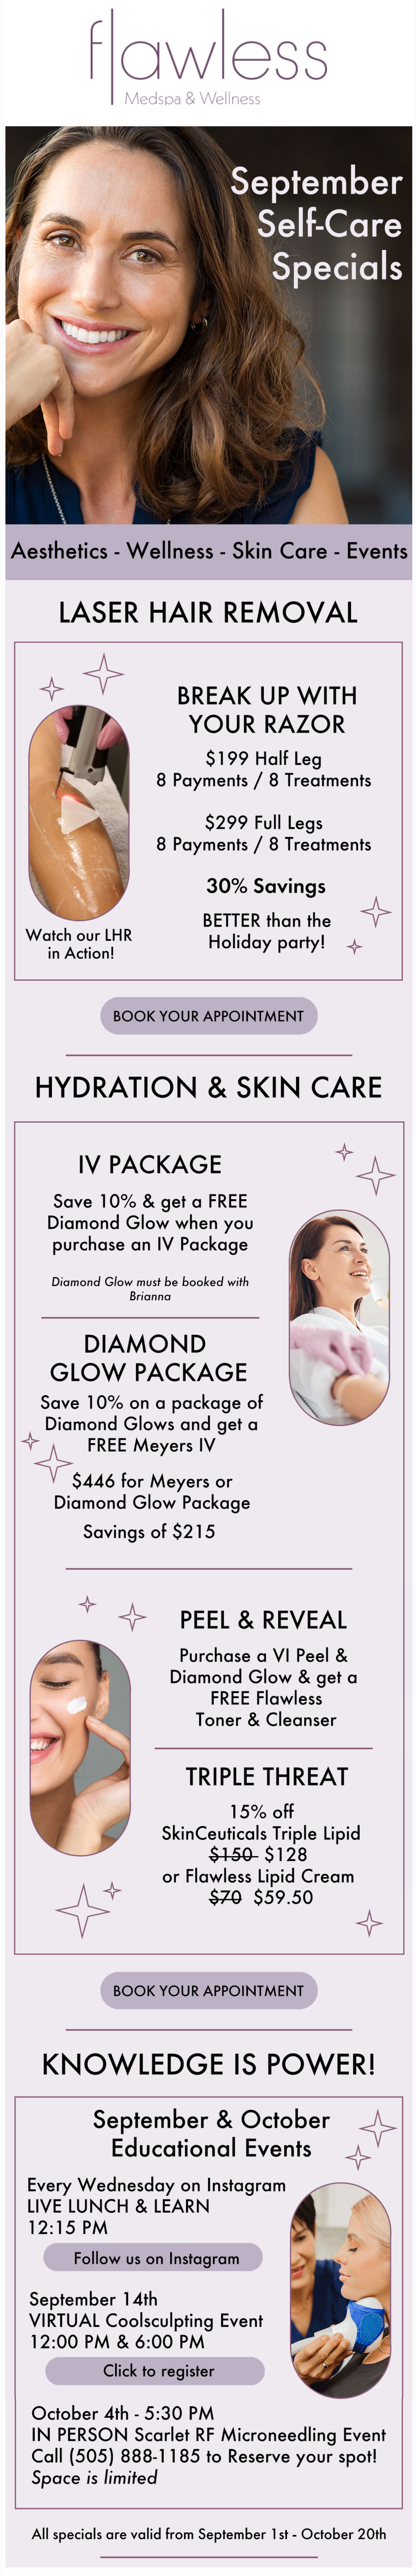 Flawless Med Spa specials for September